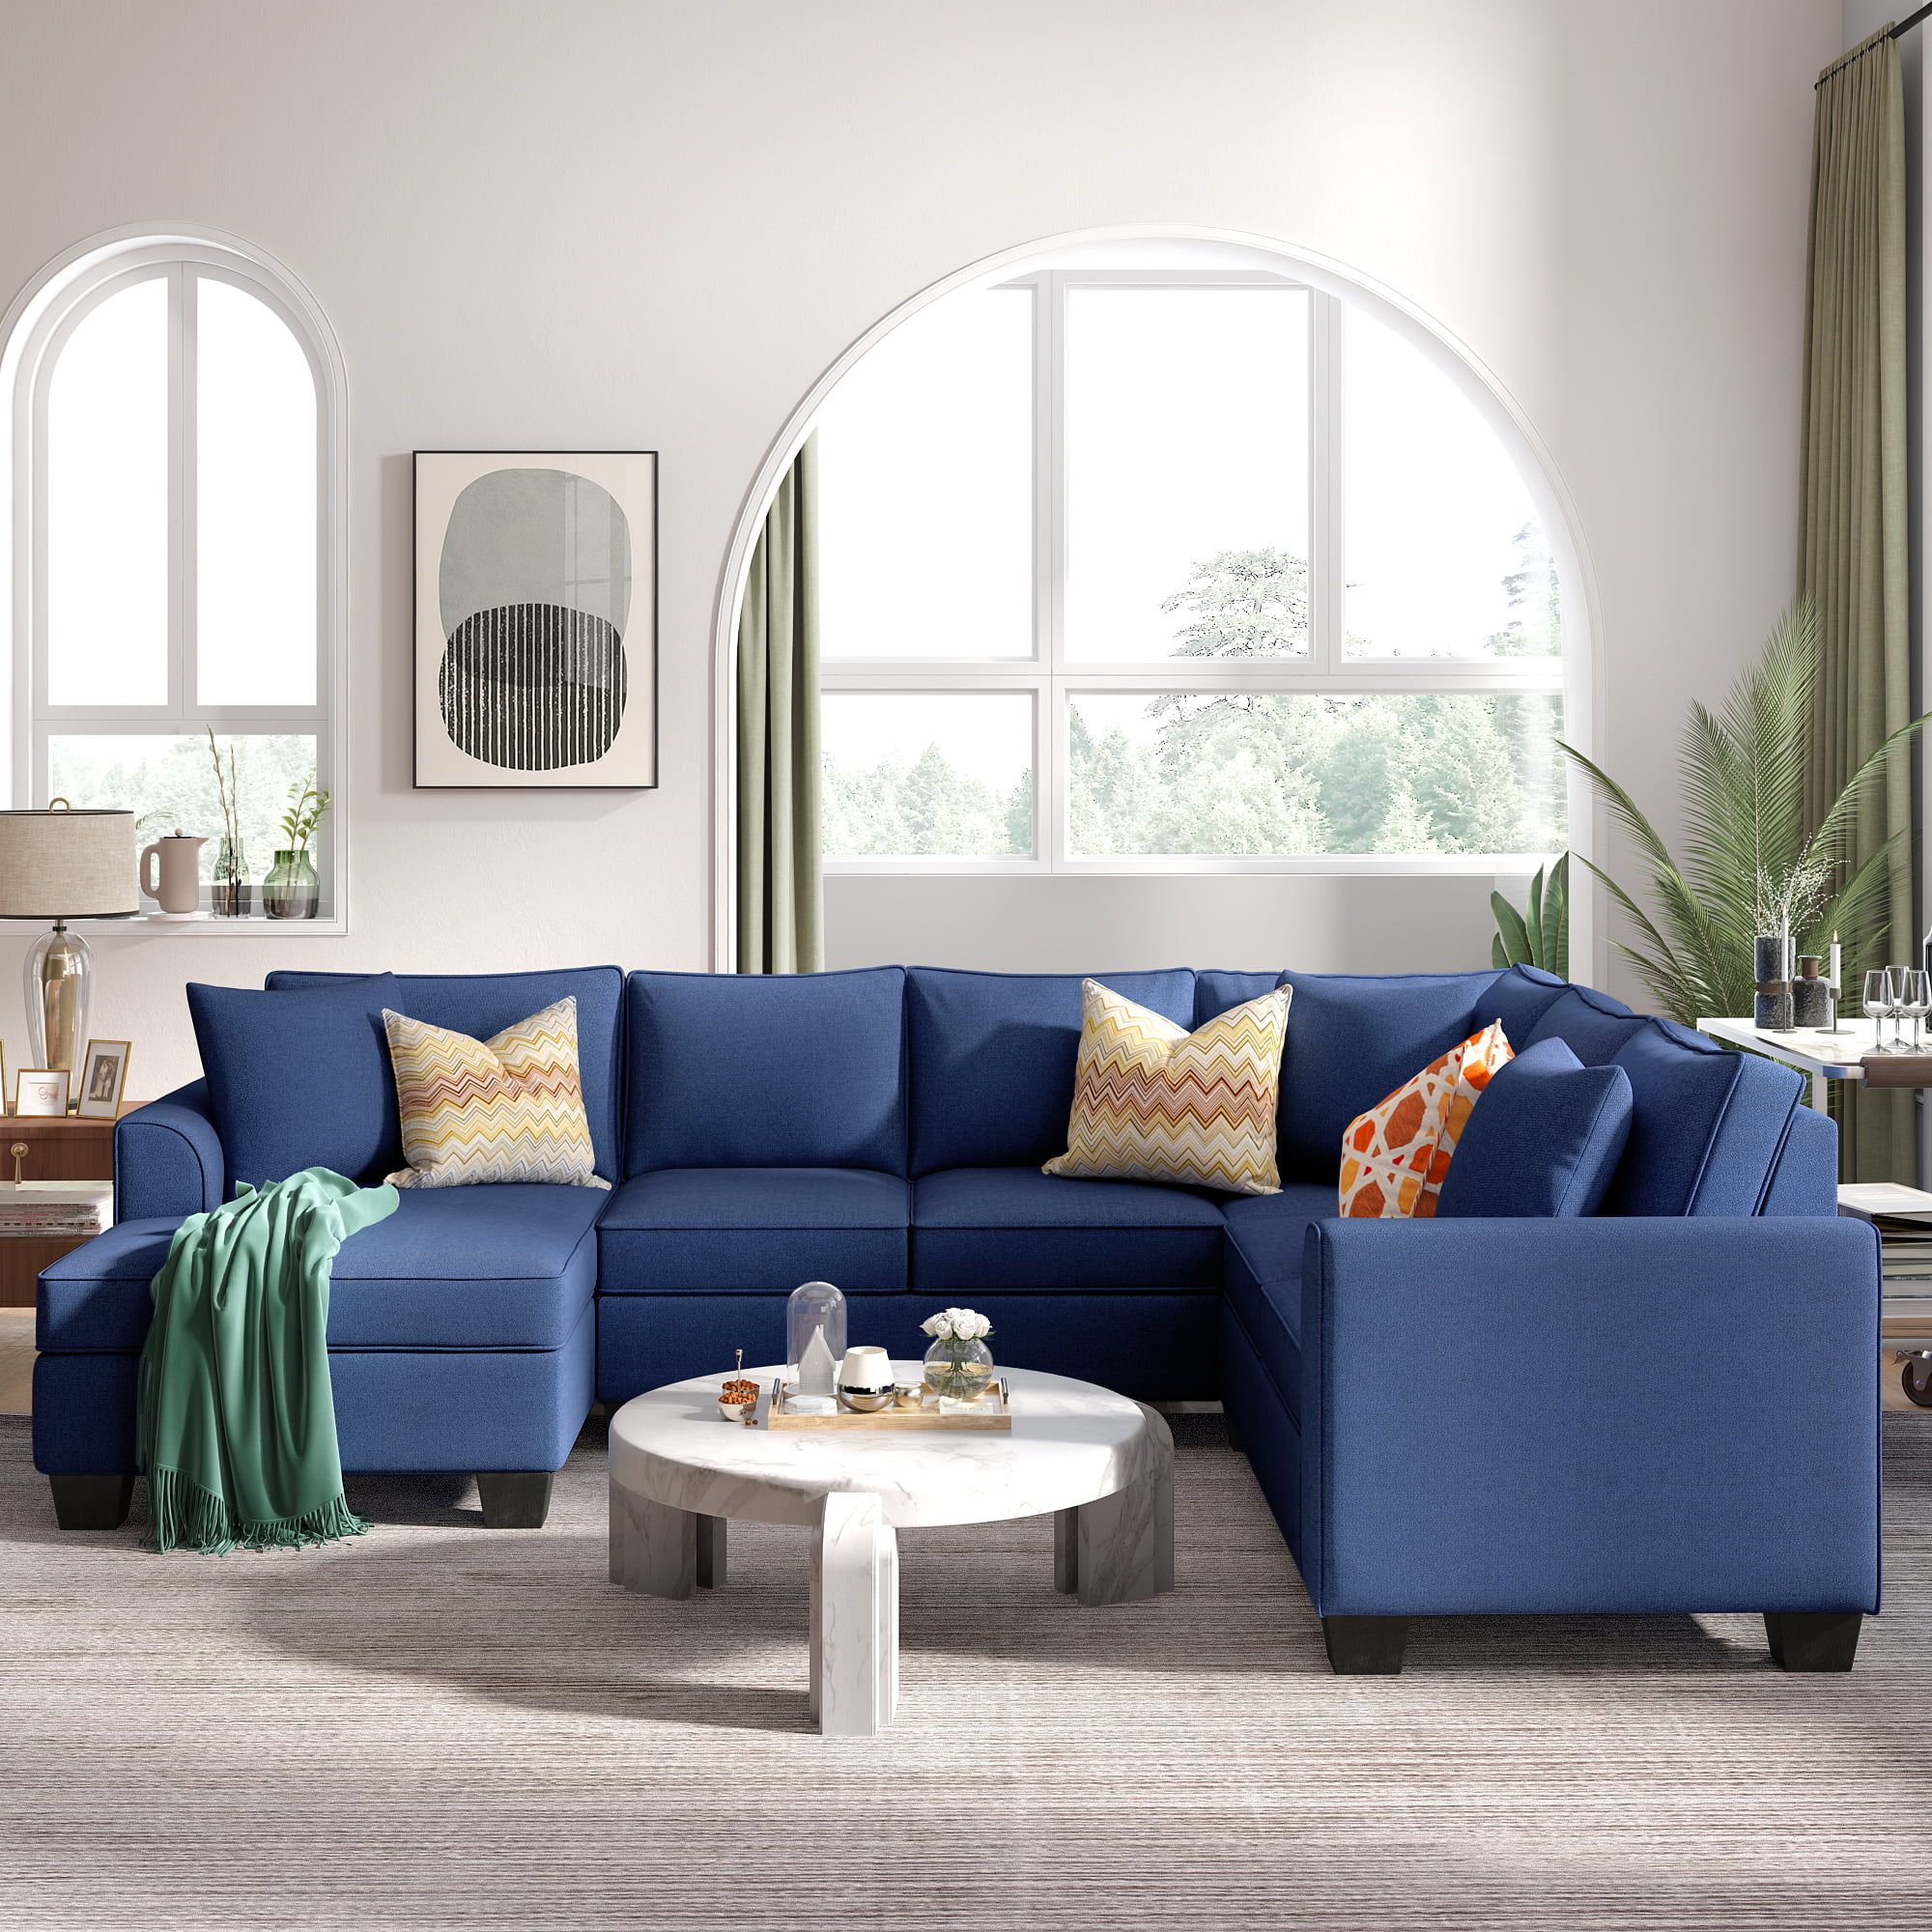 7 Seater Sectional Sofa Sets, Upholstered Modern U Shaped Sofa With 3  Pillows For Living Room, Blue – Walmart Throughout 7 Seater Sectional Couch With Ottoman And 3 Pillows (Gallery 7 of 20)